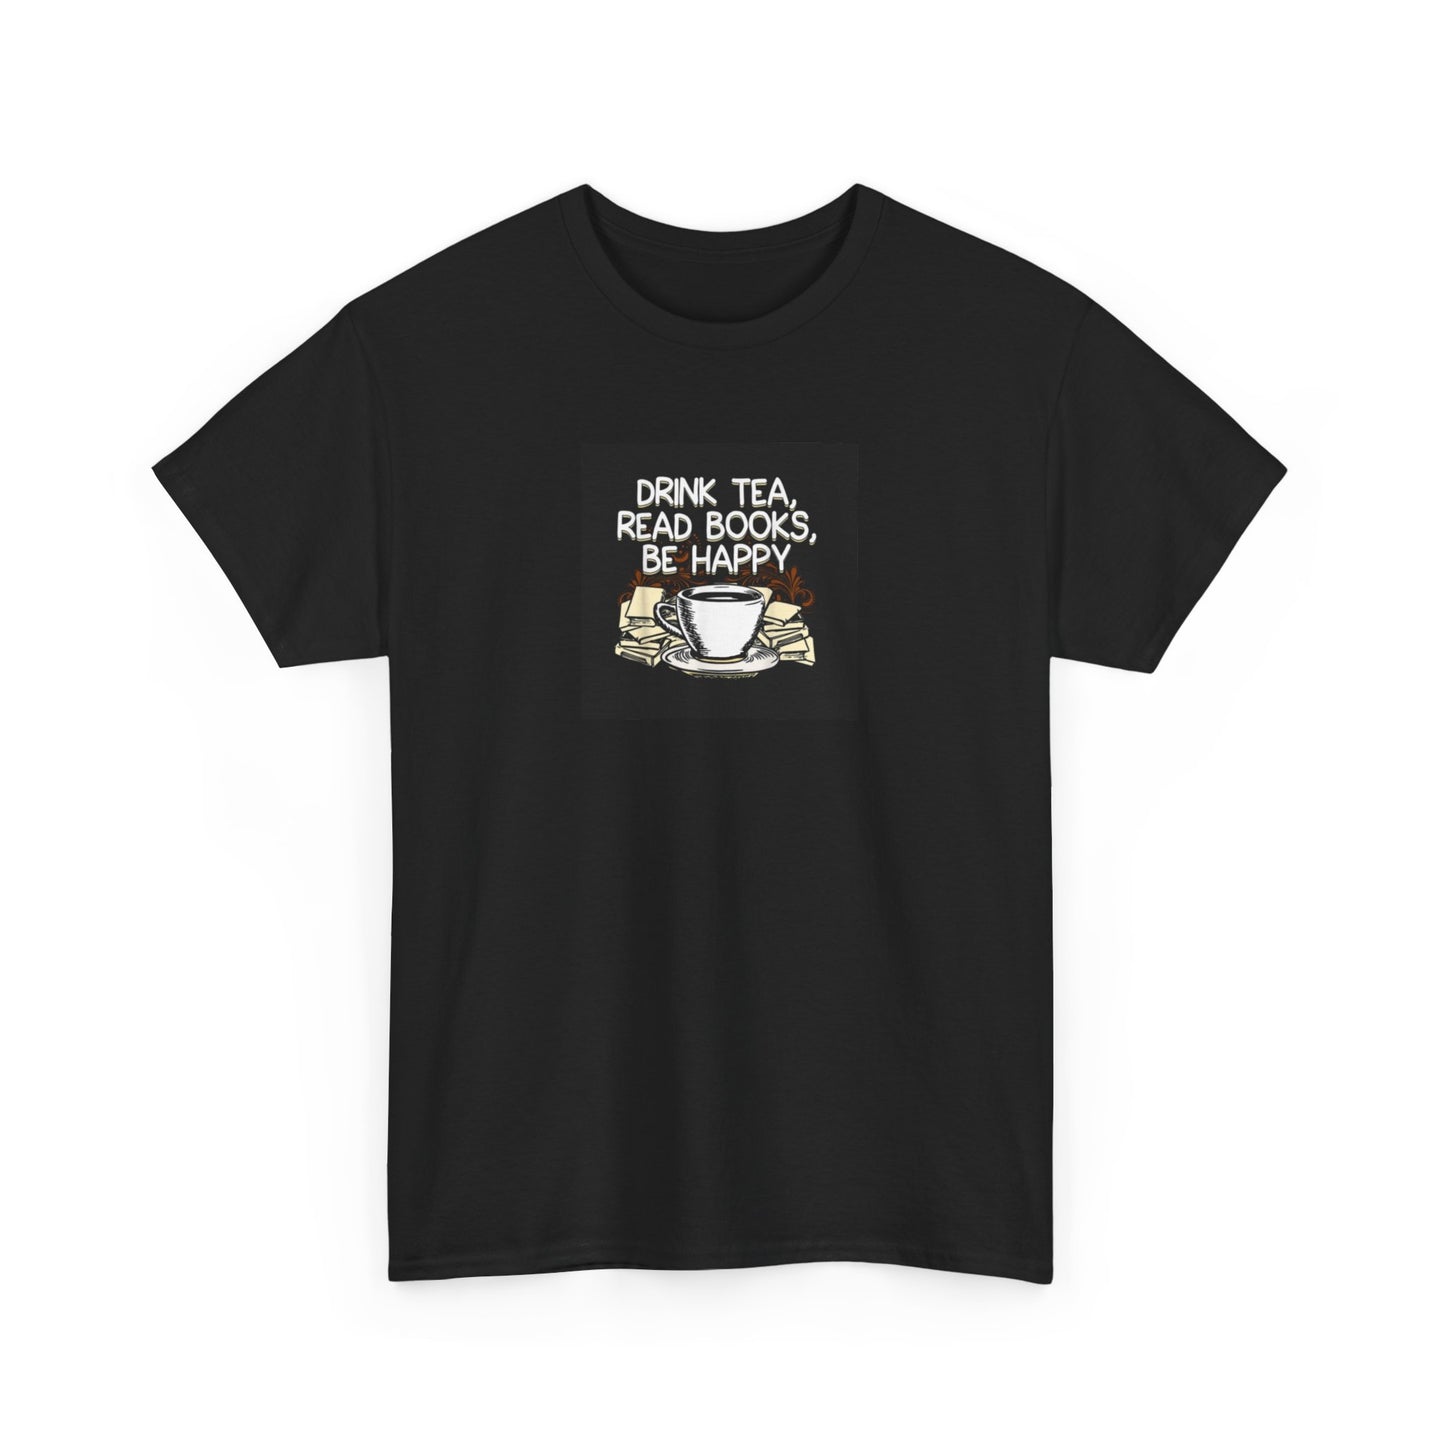 Book Lover's T-Shirt 'Read Books, Drink Tea and Be Happy'